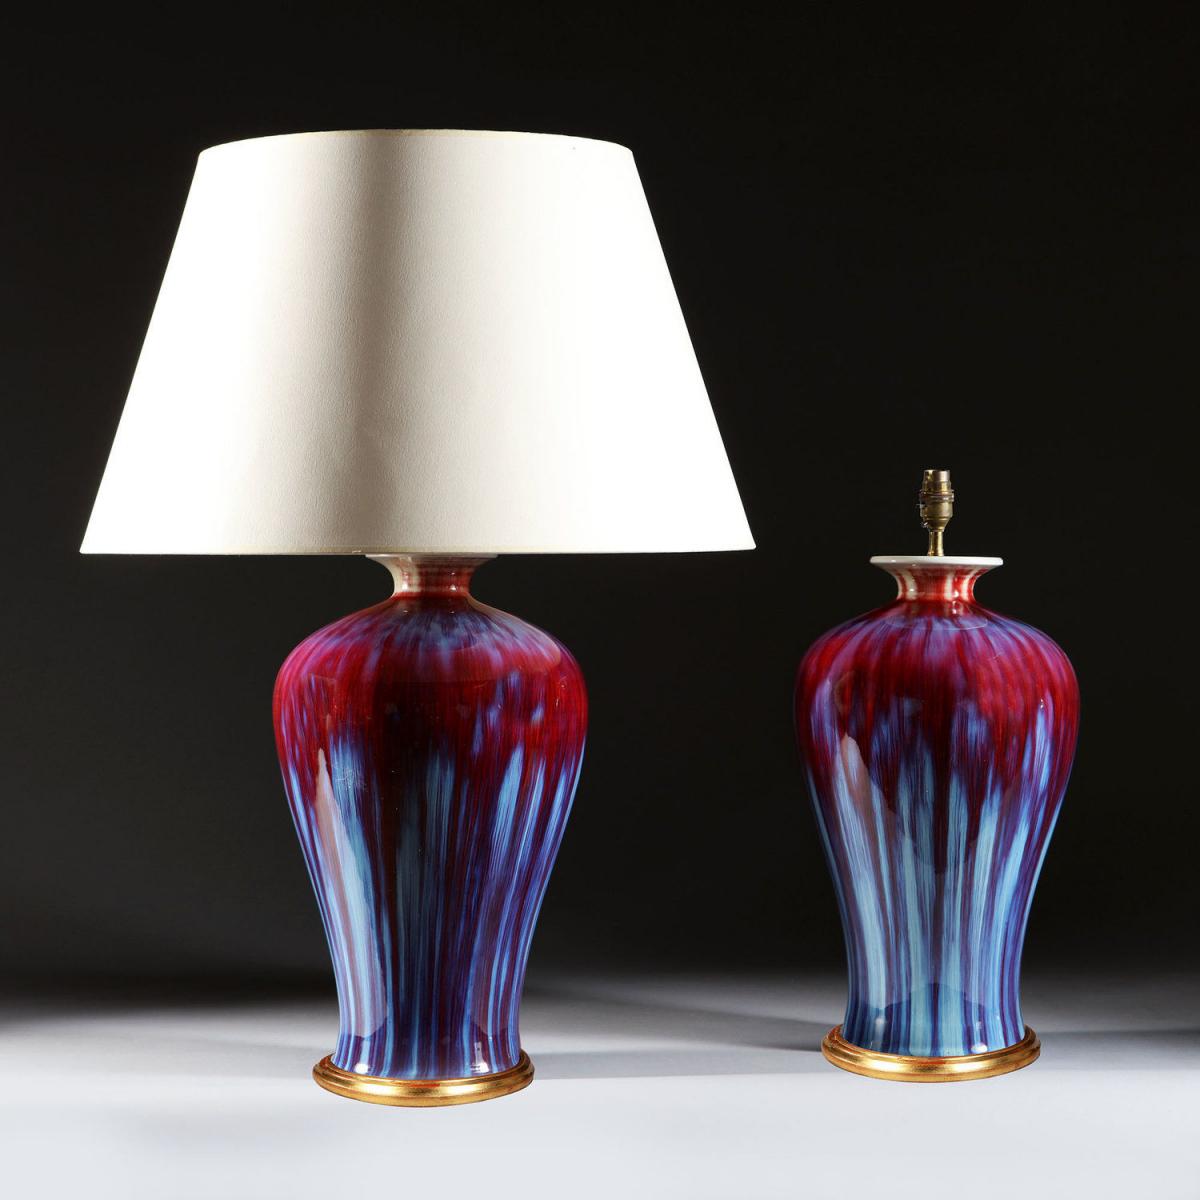 A Pair of Flambe Vases as Lamps